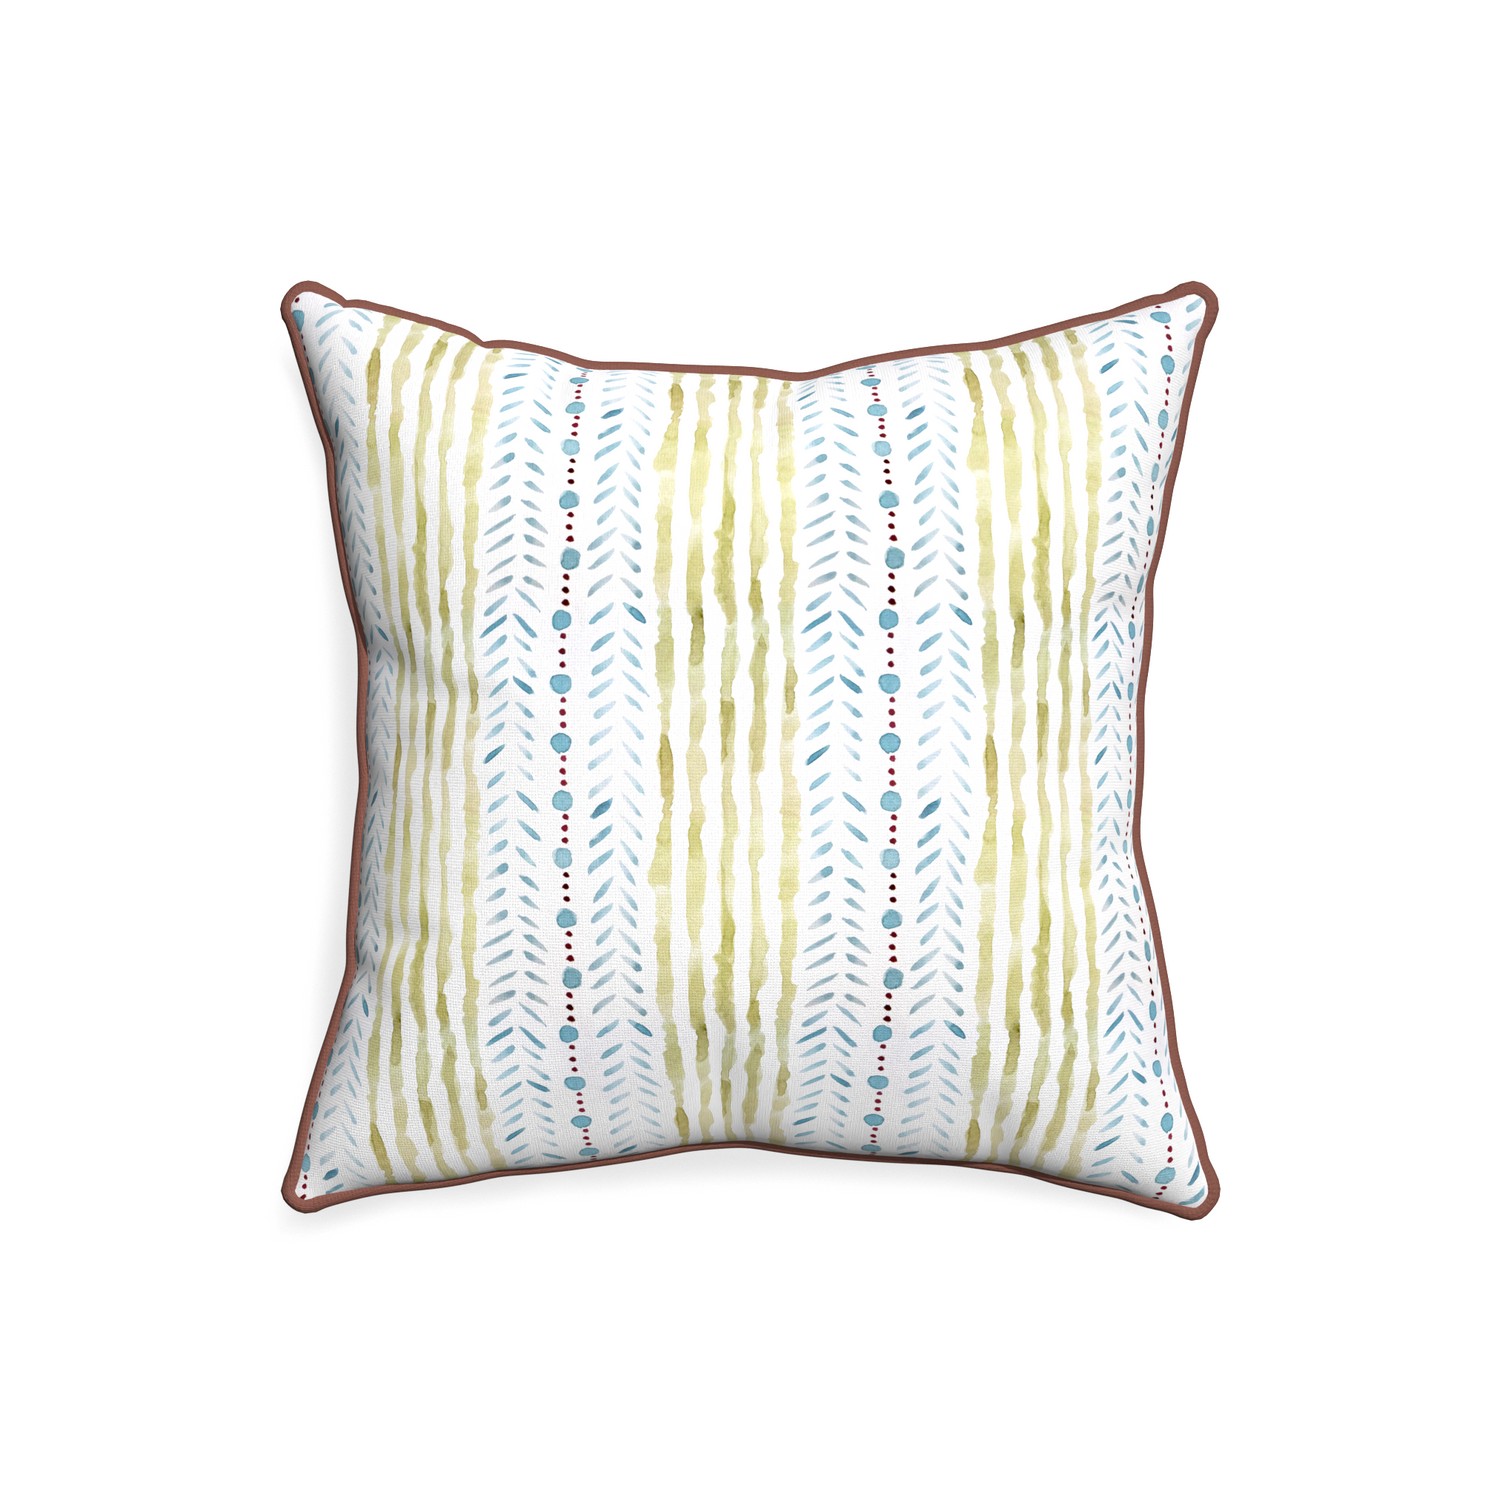 20-square julia custom blue & green stripedpillow with w piping on white background